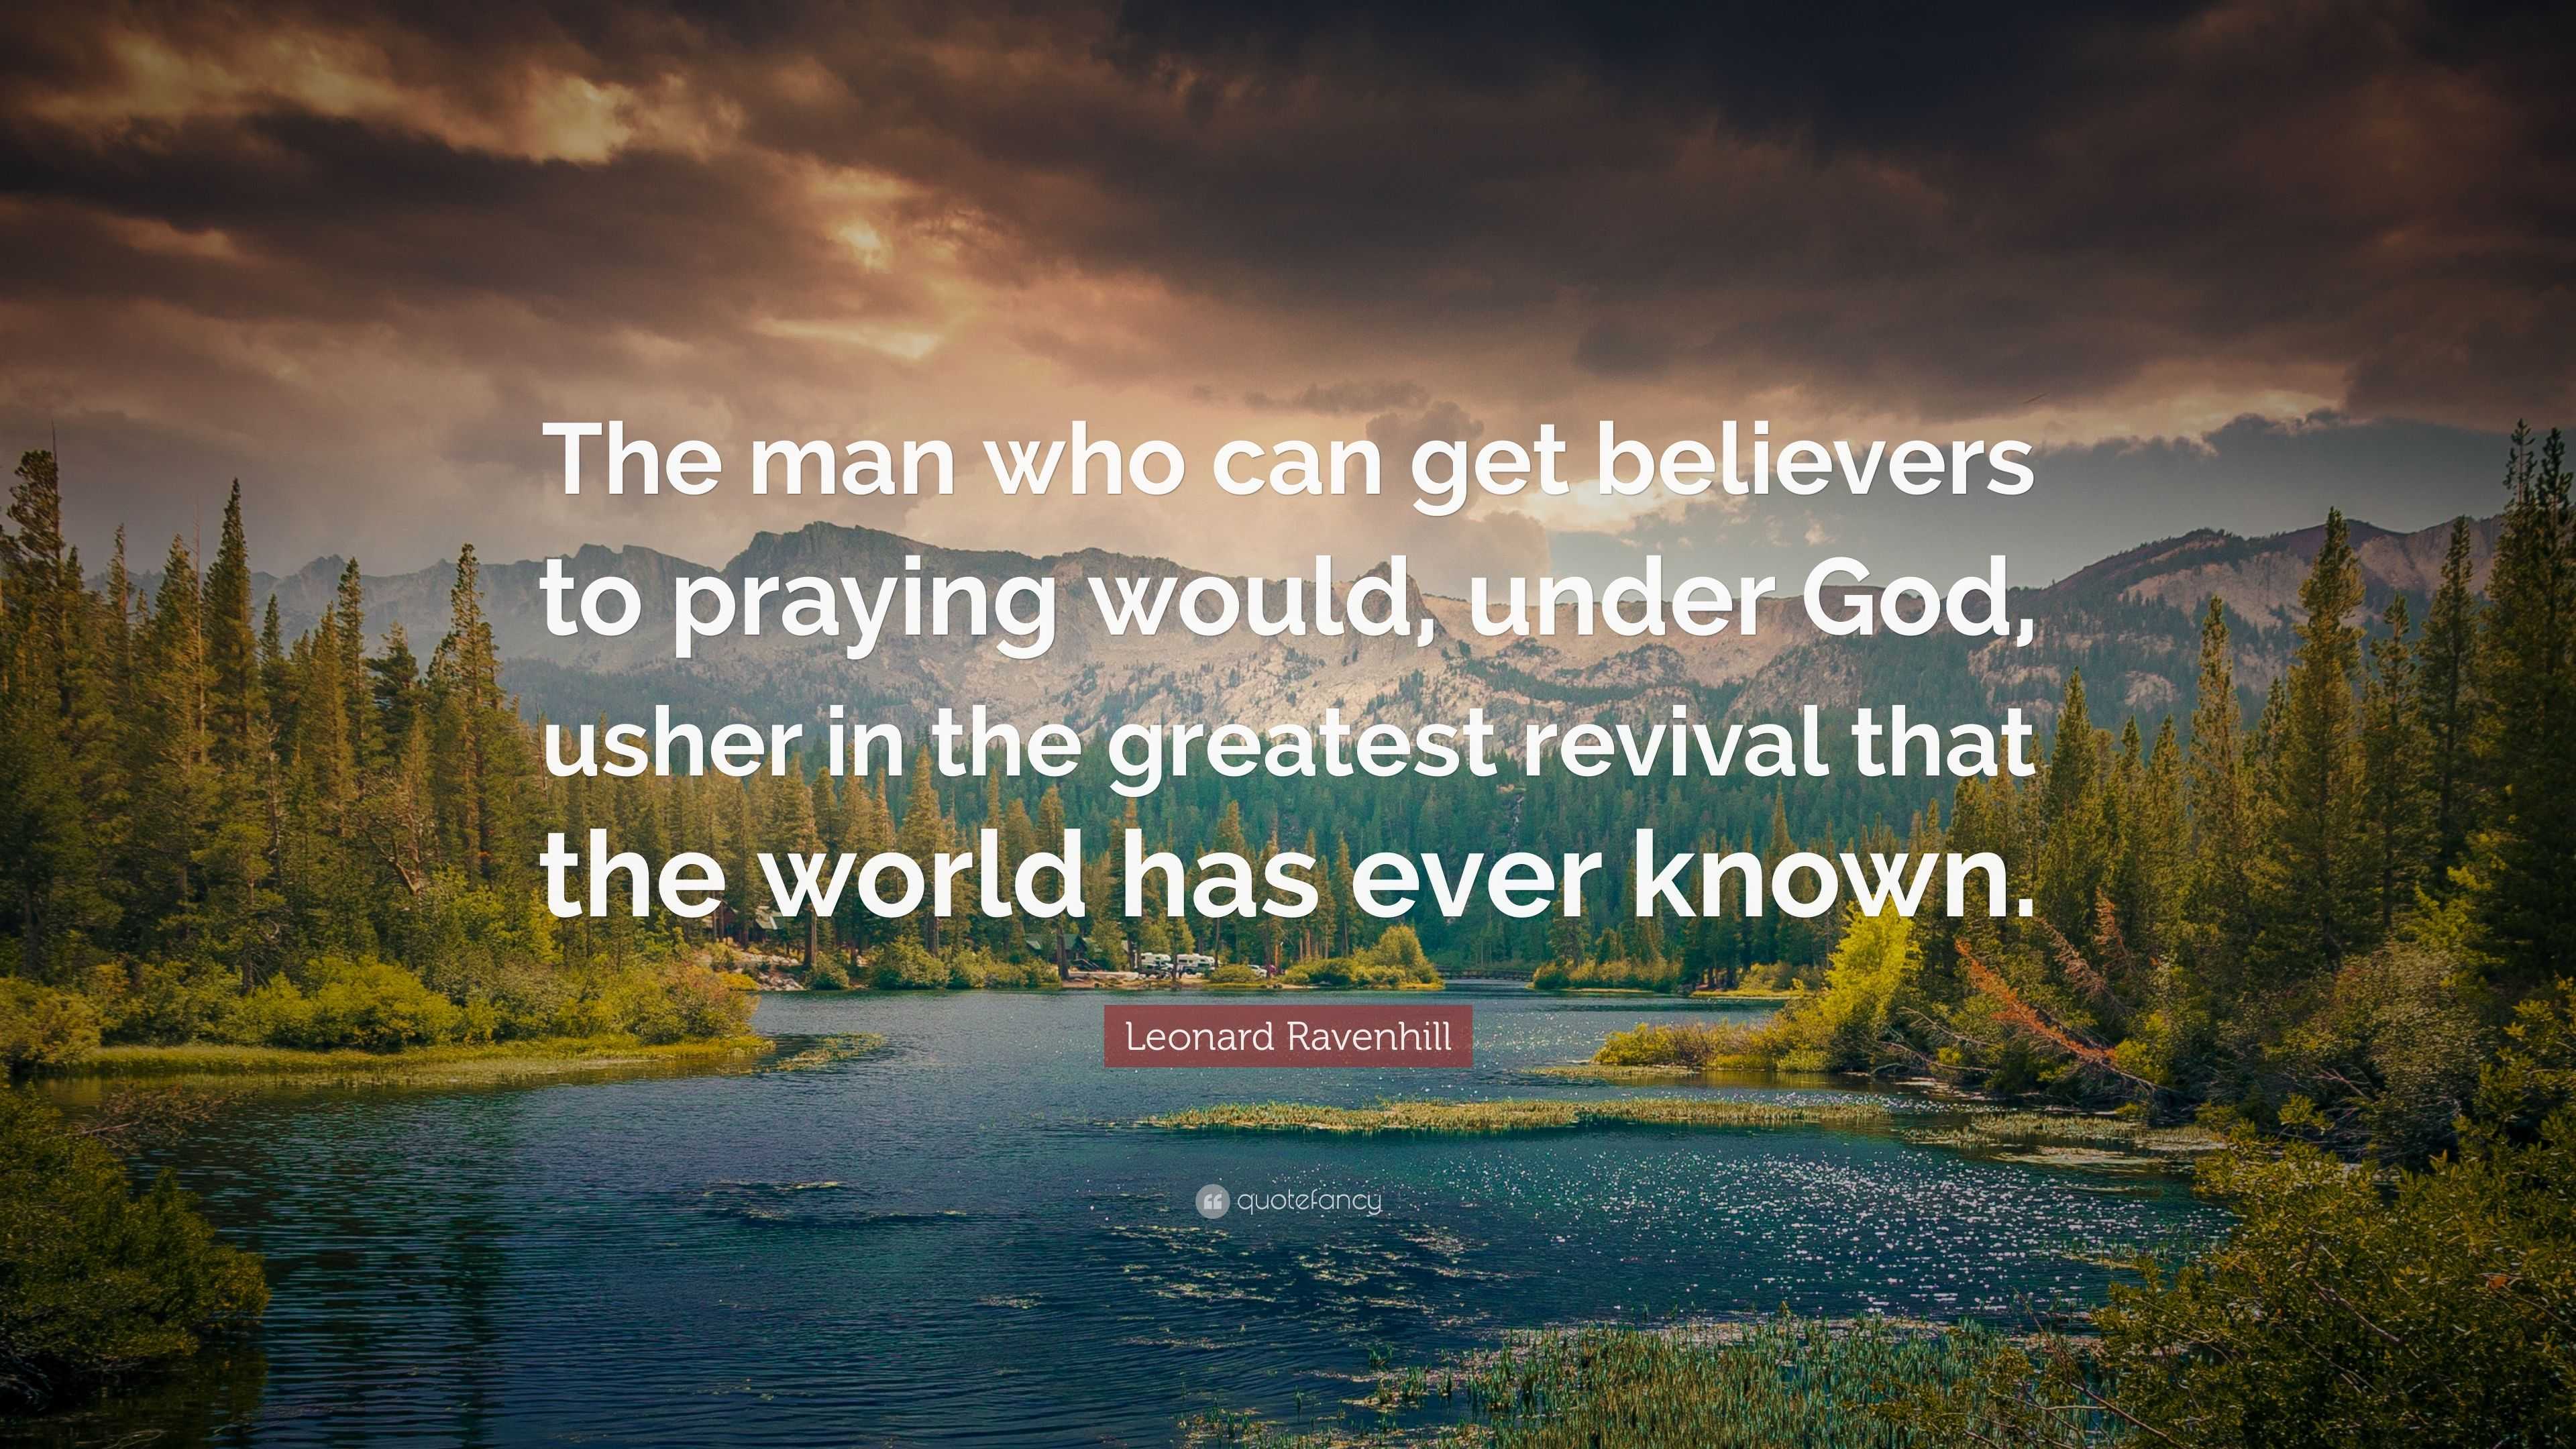 Leonard Ravenhill Quote: "The man who can get believers to ...